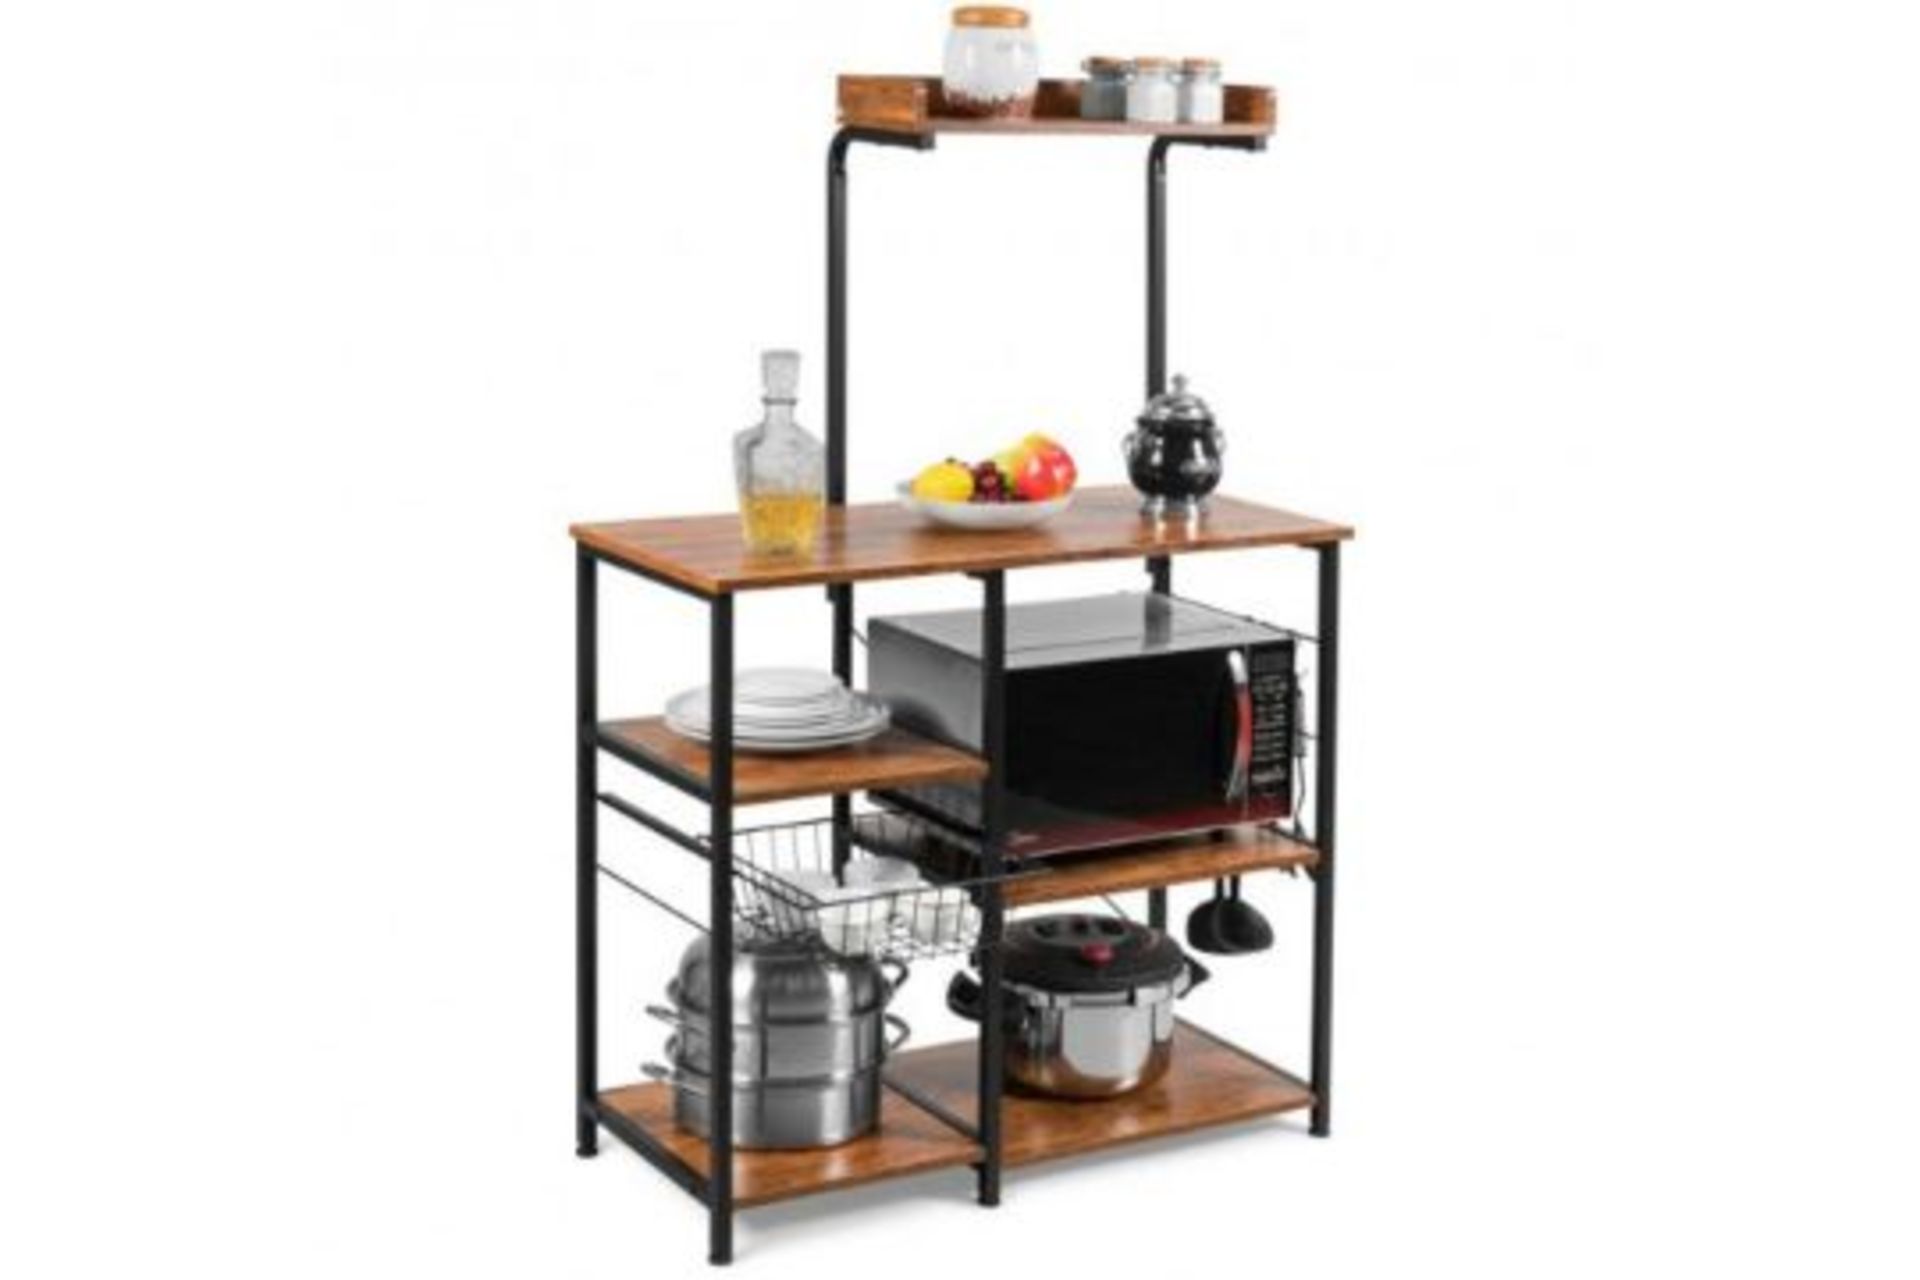 4 Tier Vintage Kitchen Baker'S Rack Utility Microwave Stand. - R14.7. This 4-tier kitchen baker's